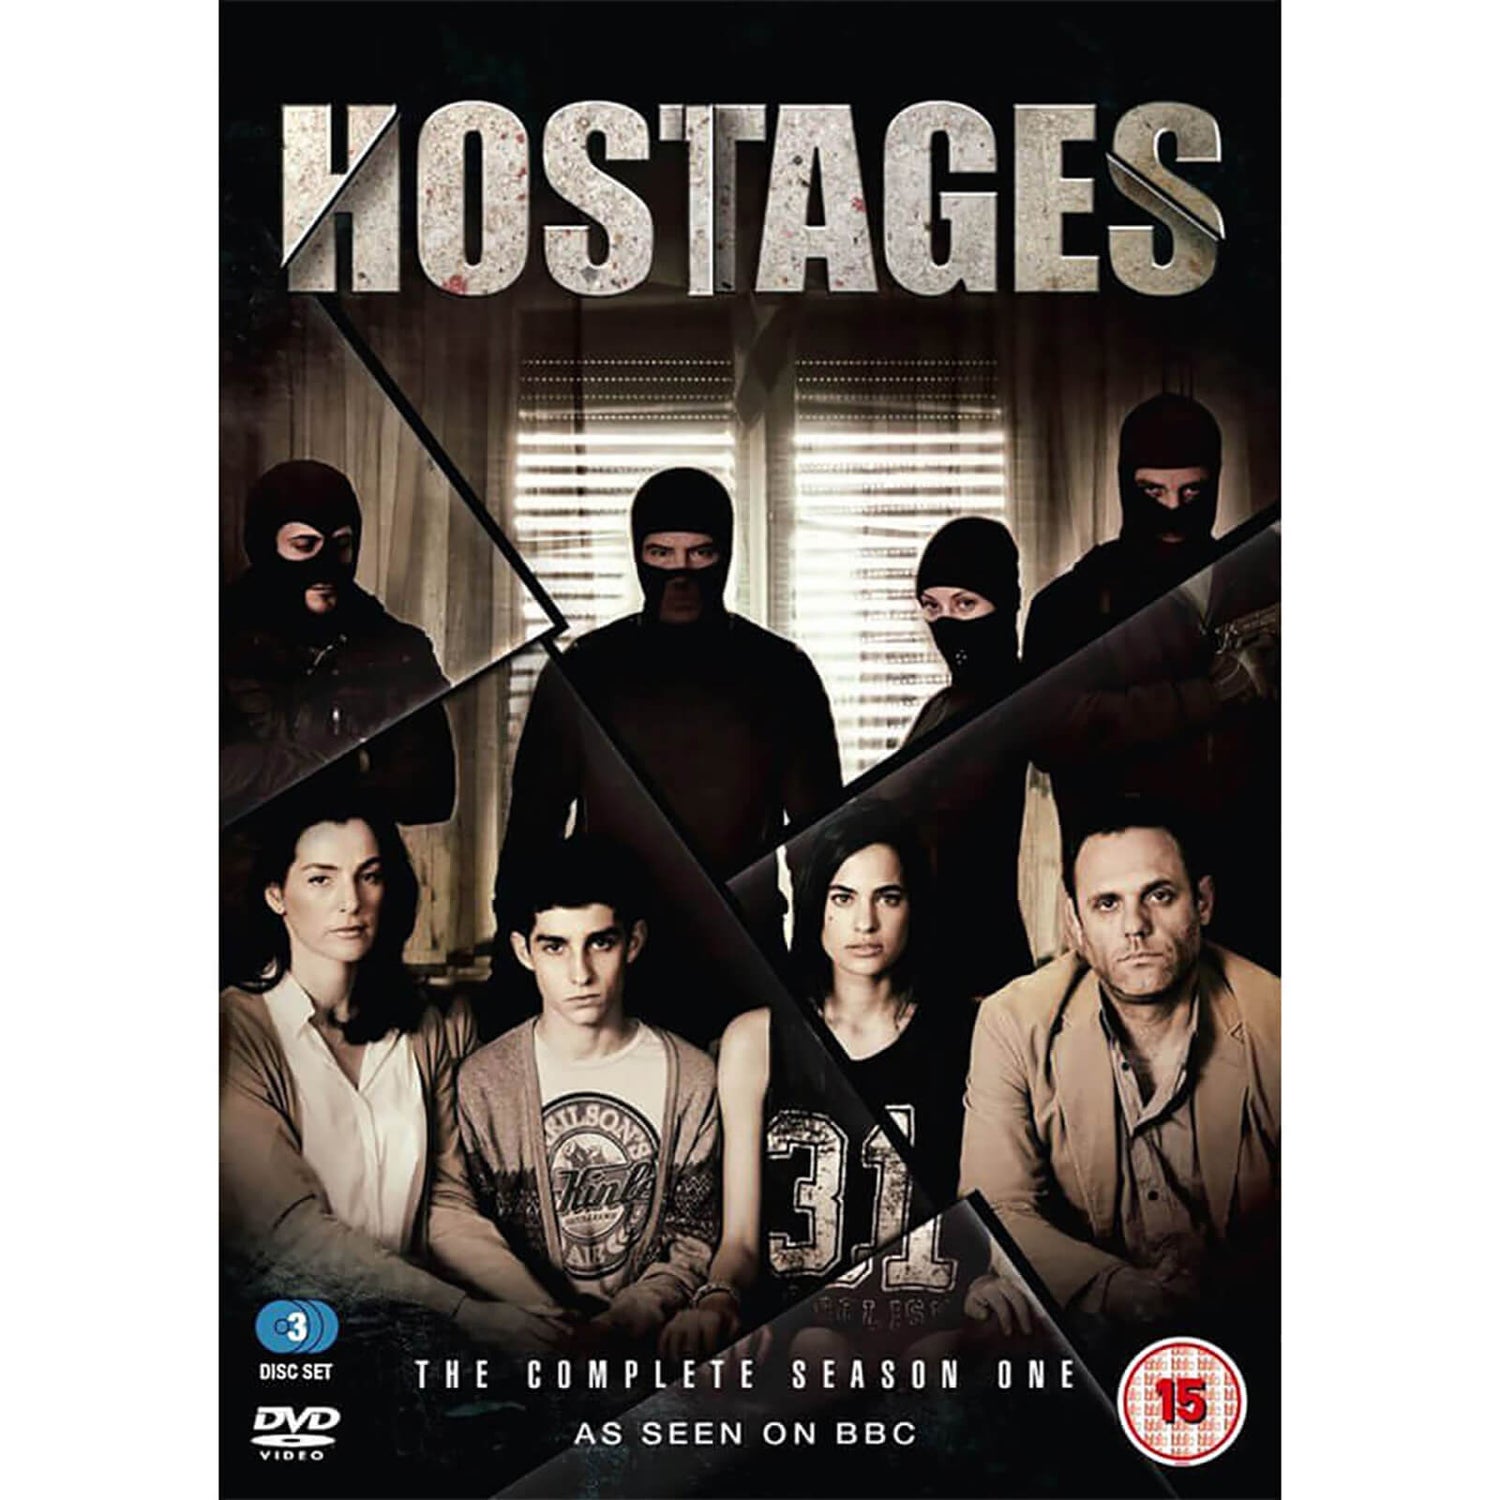 Hostages Series 1 DVD